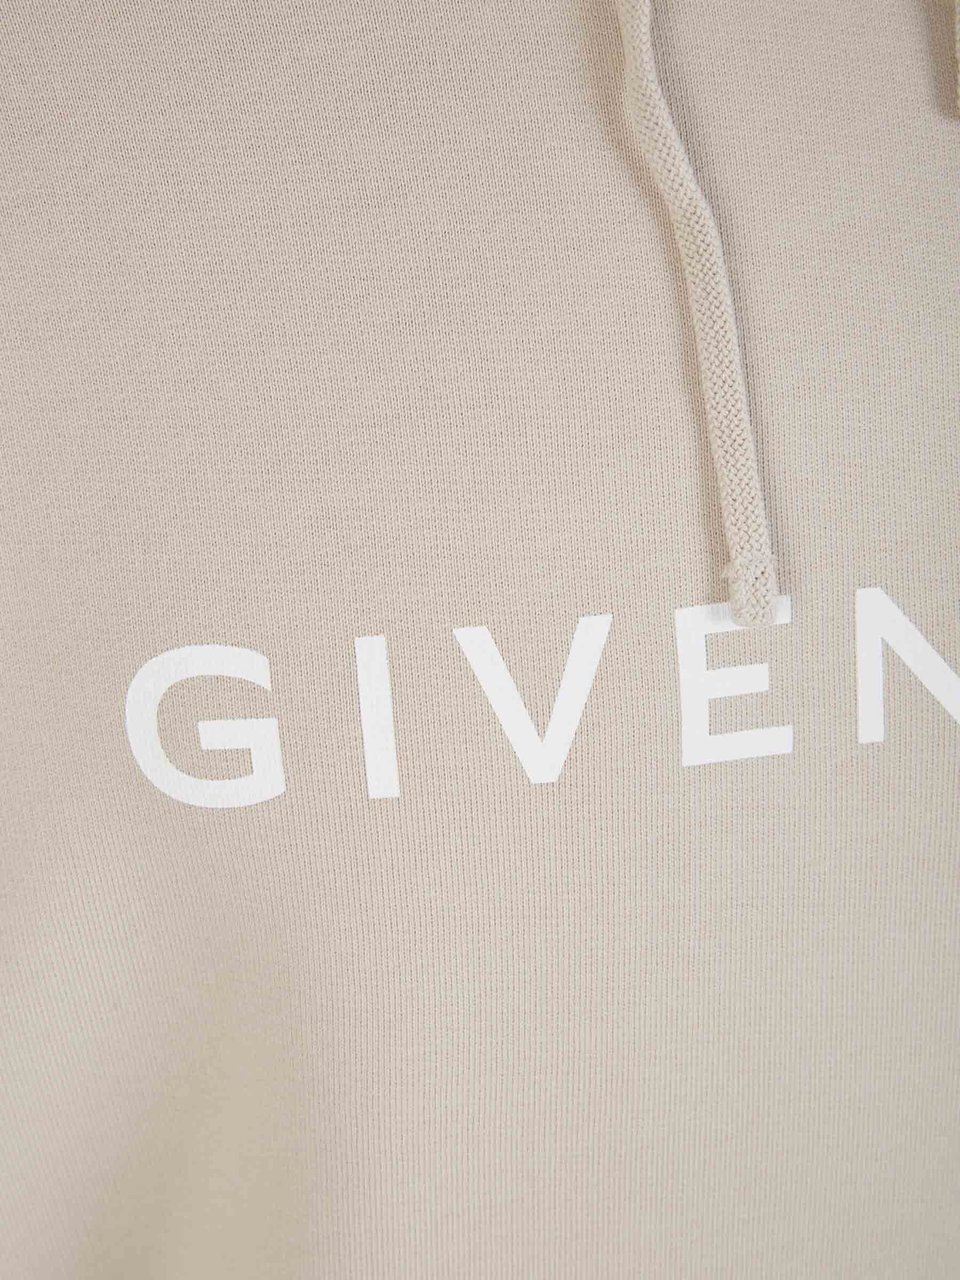 Givenchy Archetype Hoodie Beige